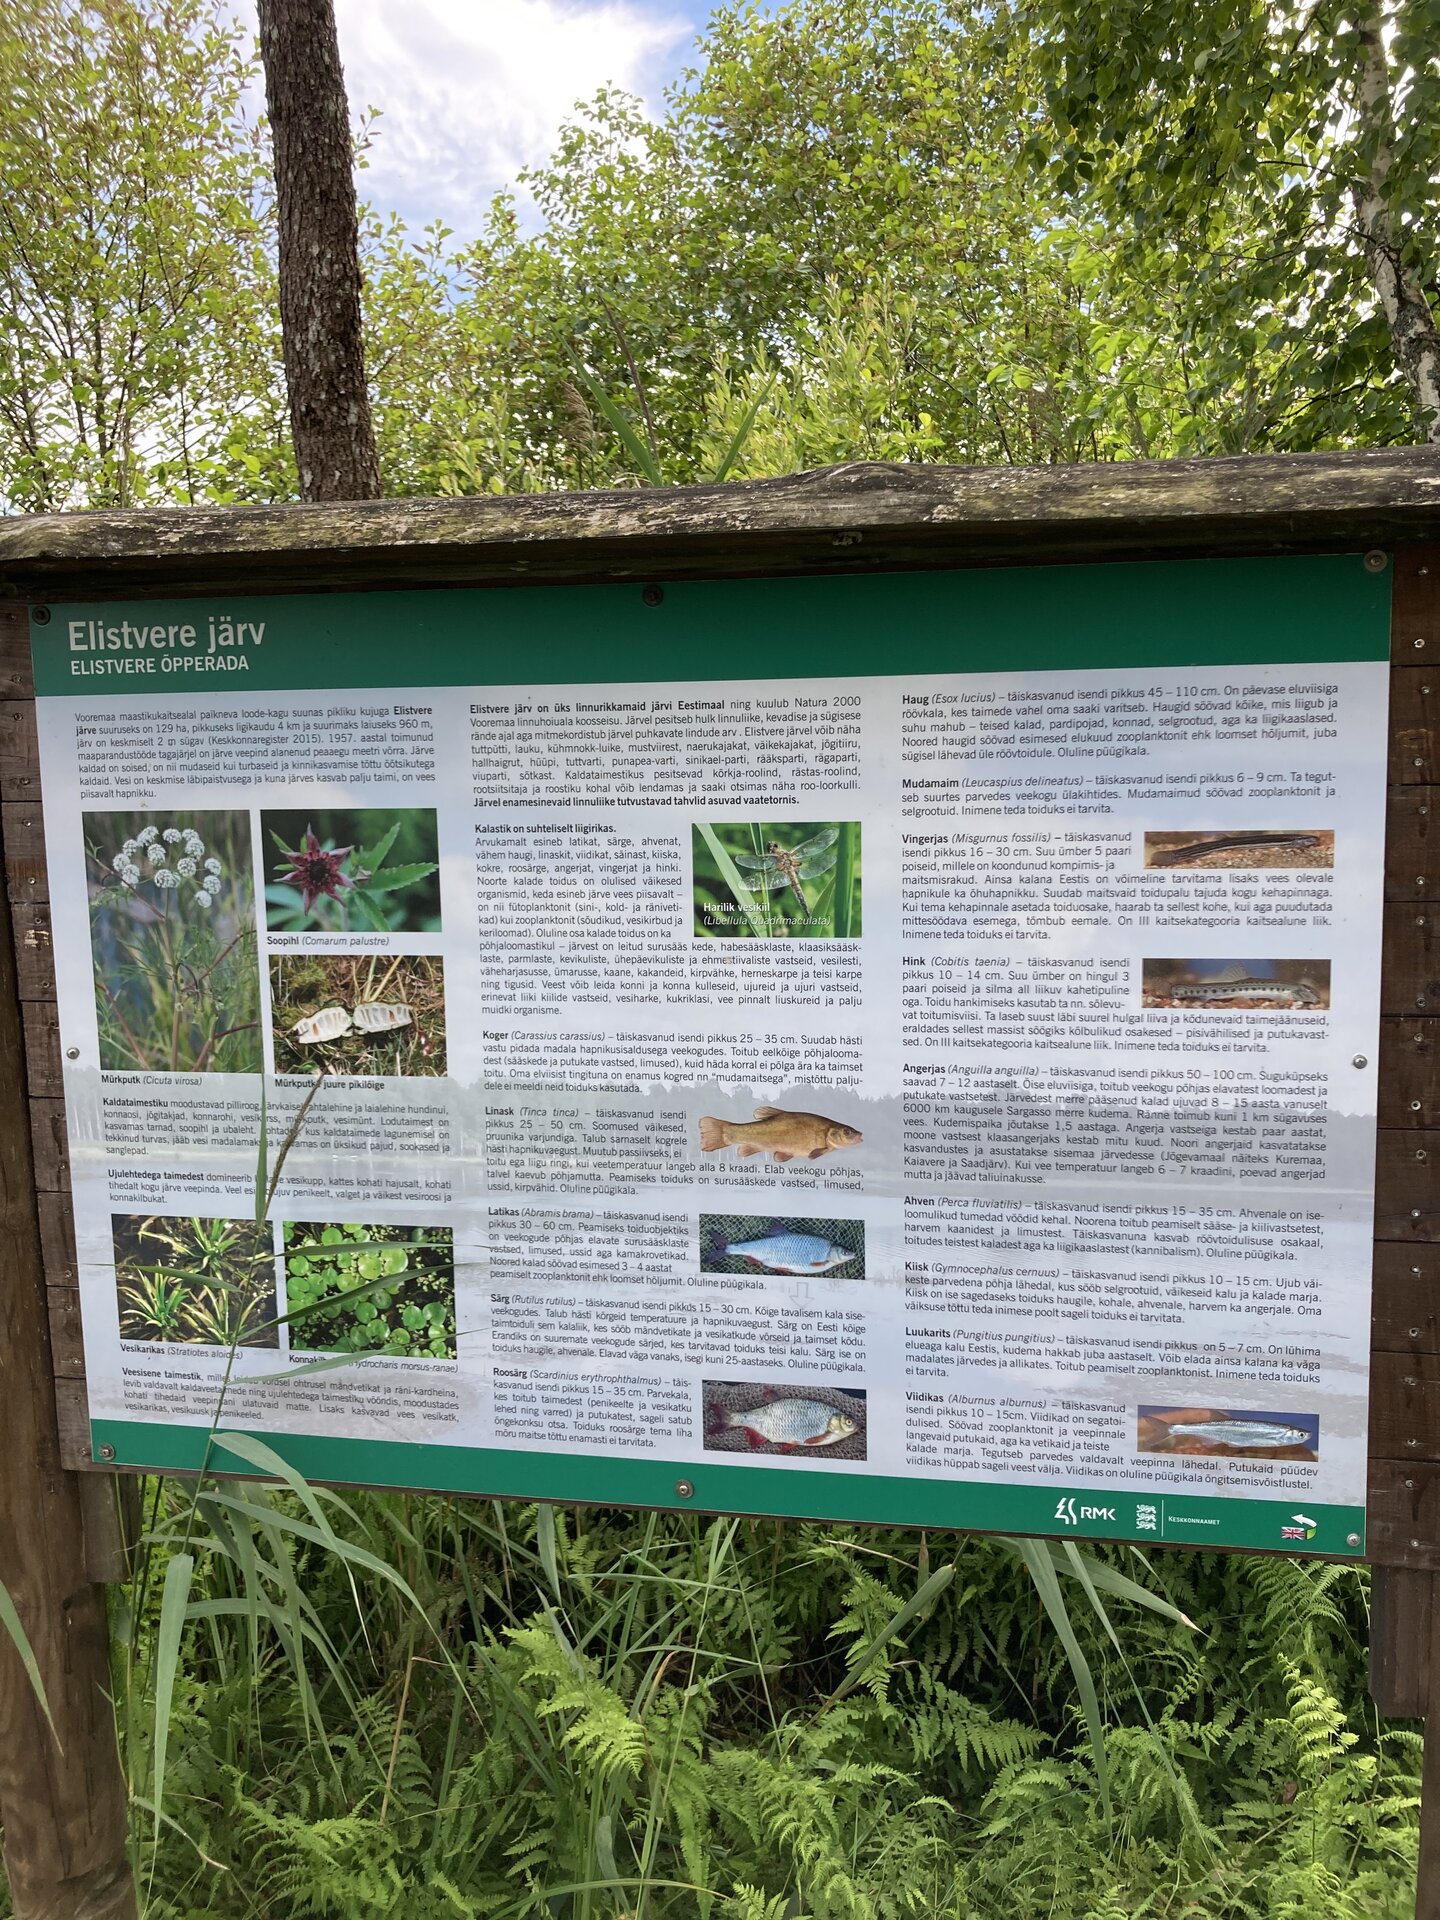 Elistvere study trail has several information boards